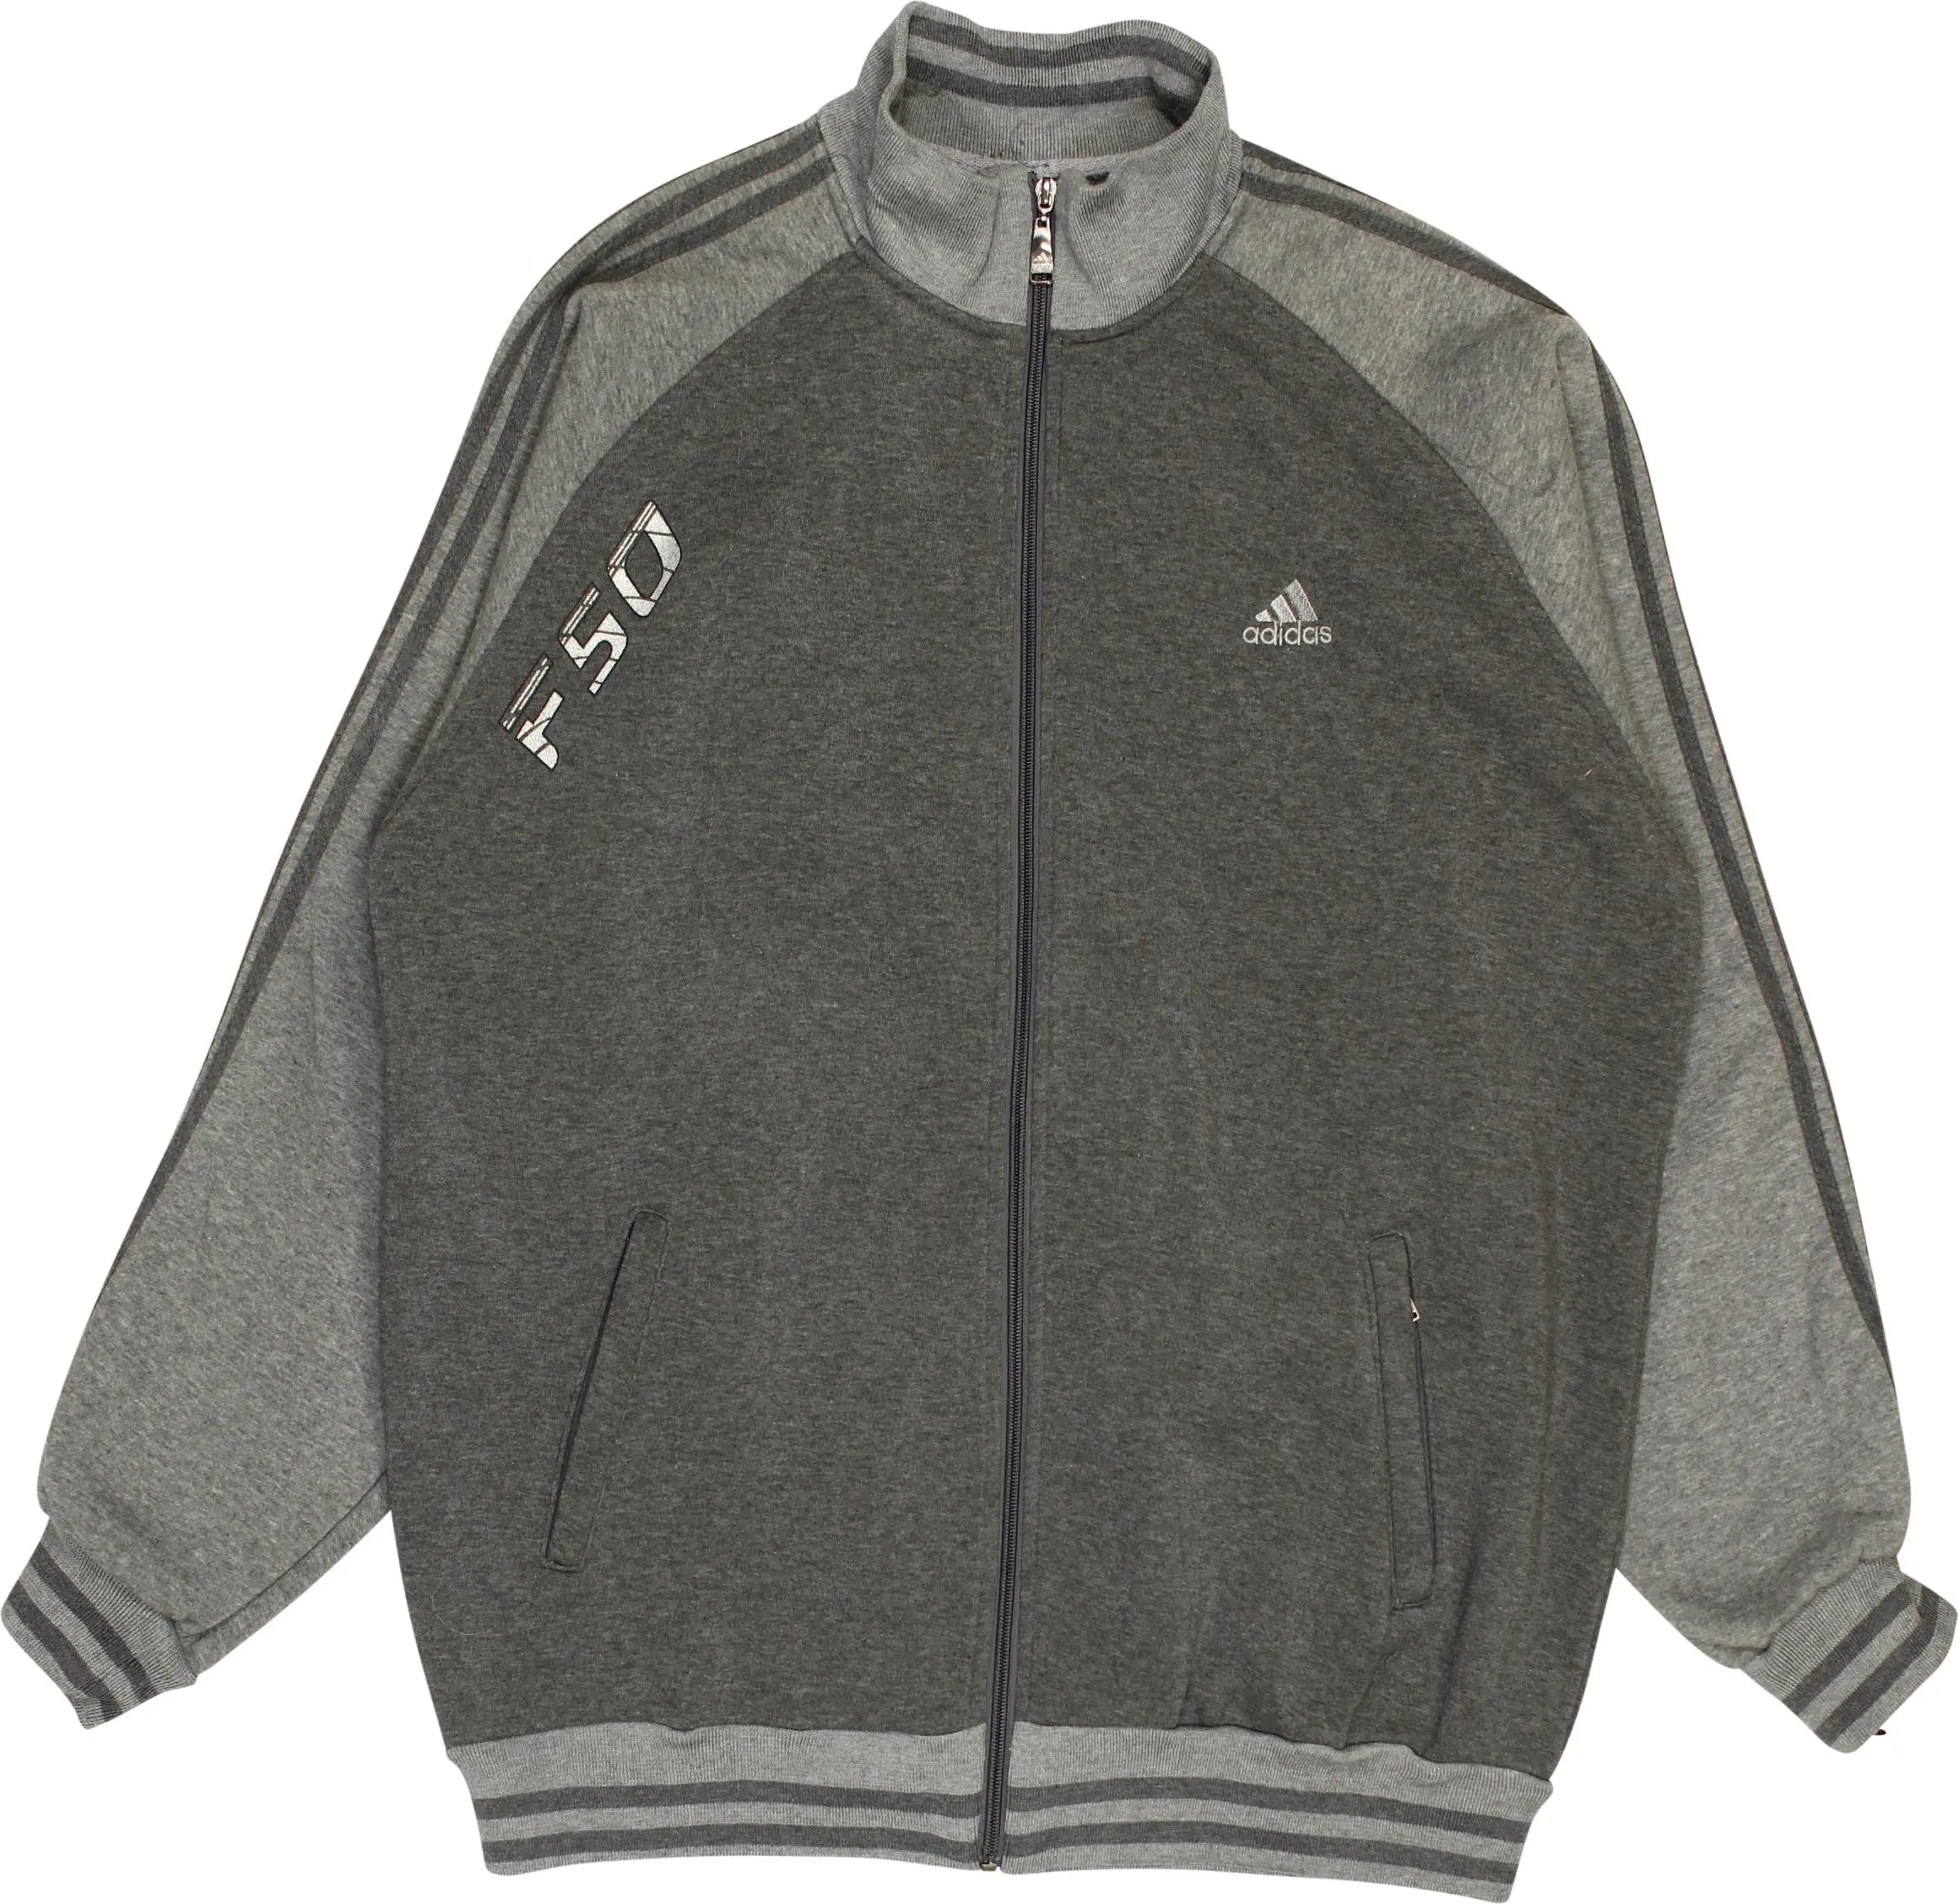 Adidas - Zip Up Sweater- ThriftTale.com - Vintage and second handclothing